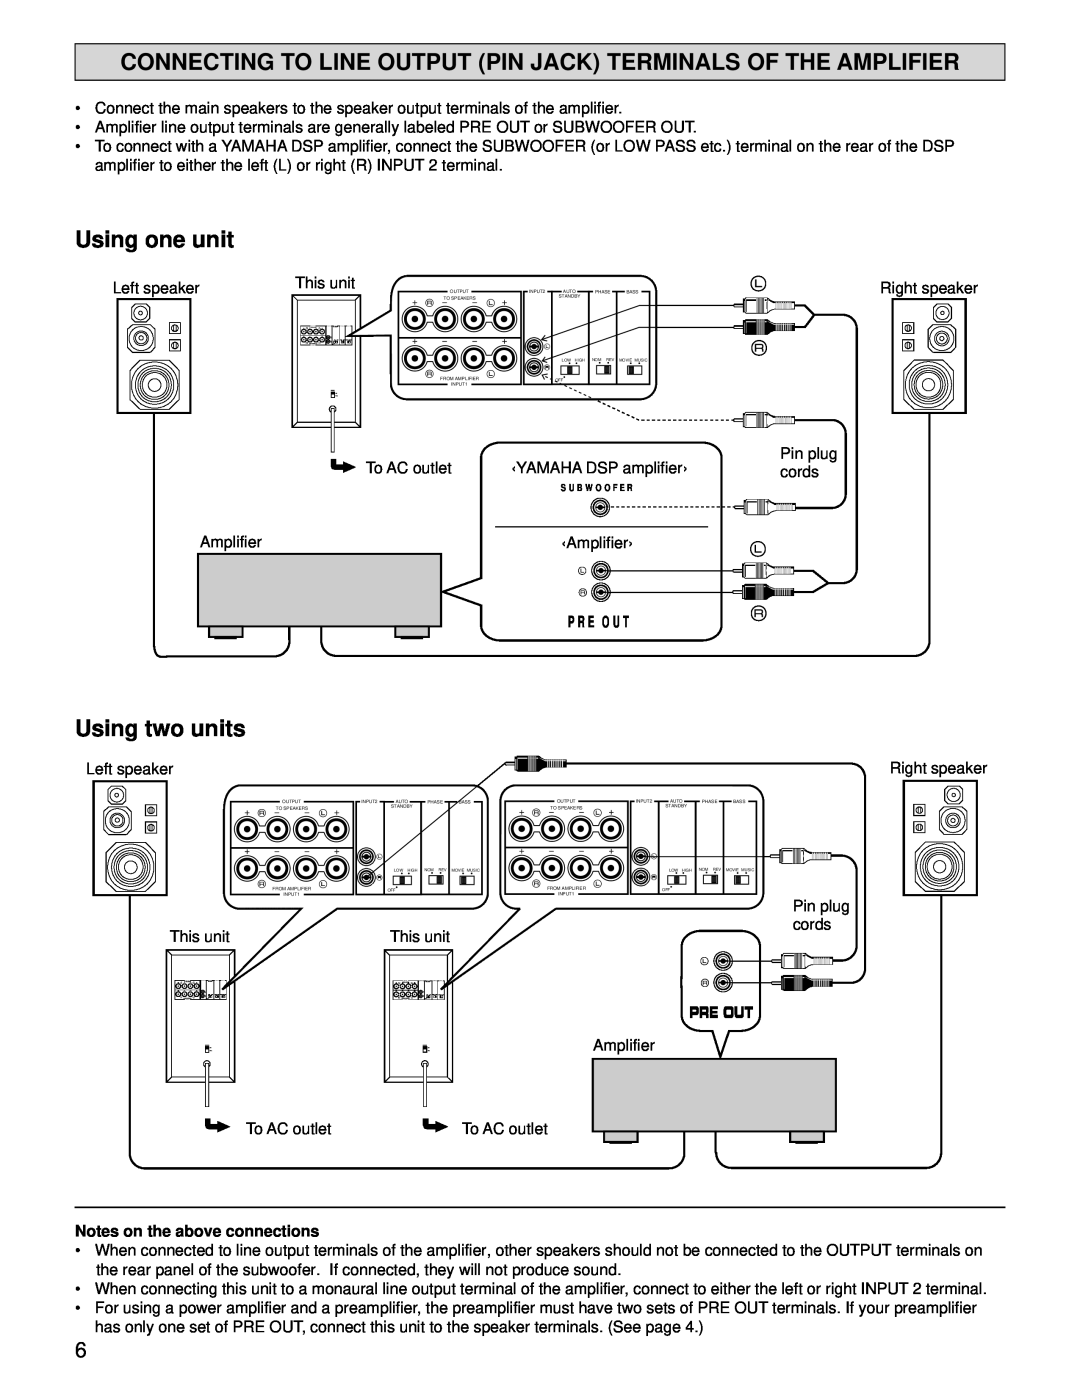 Yamaha YST-SW160/90 owner manual Using one unit, Using two units, Pre Out, Notes on the above connections 